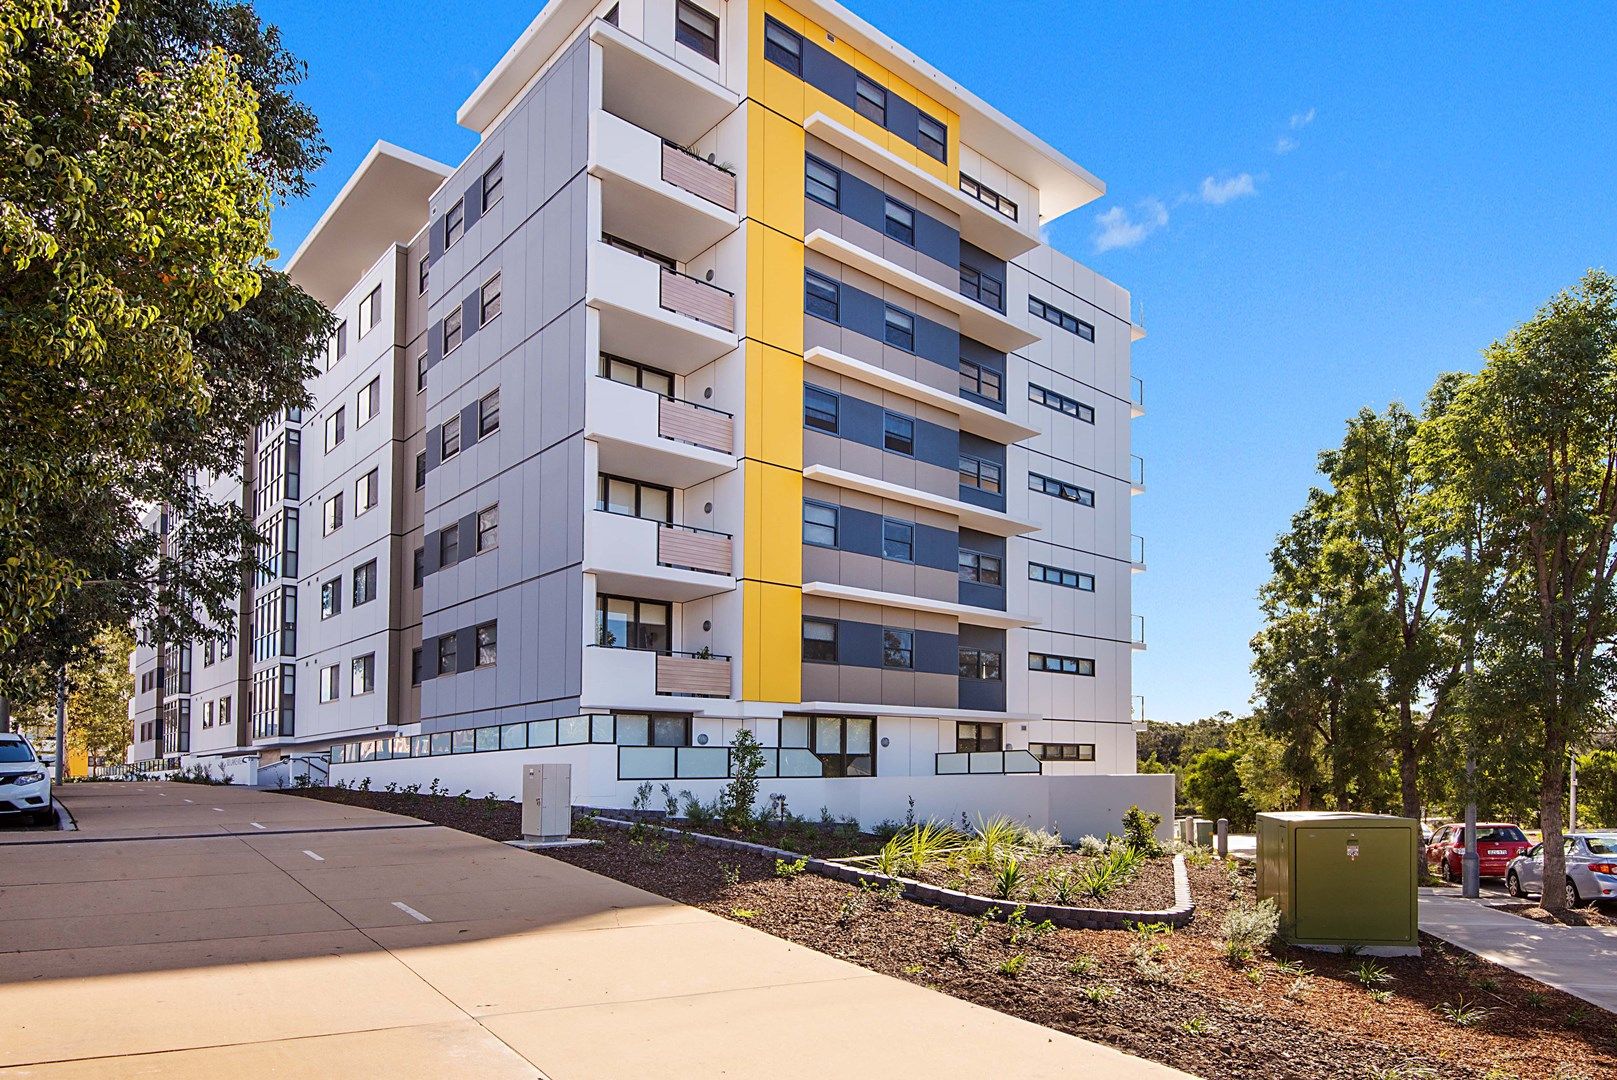 3 Bedrooms, Apartment, For Rent, Caddies Boulevard , 2 Bathrooms, Listing ID 1551, Rouse Hill, NSW, Australia, 2155,